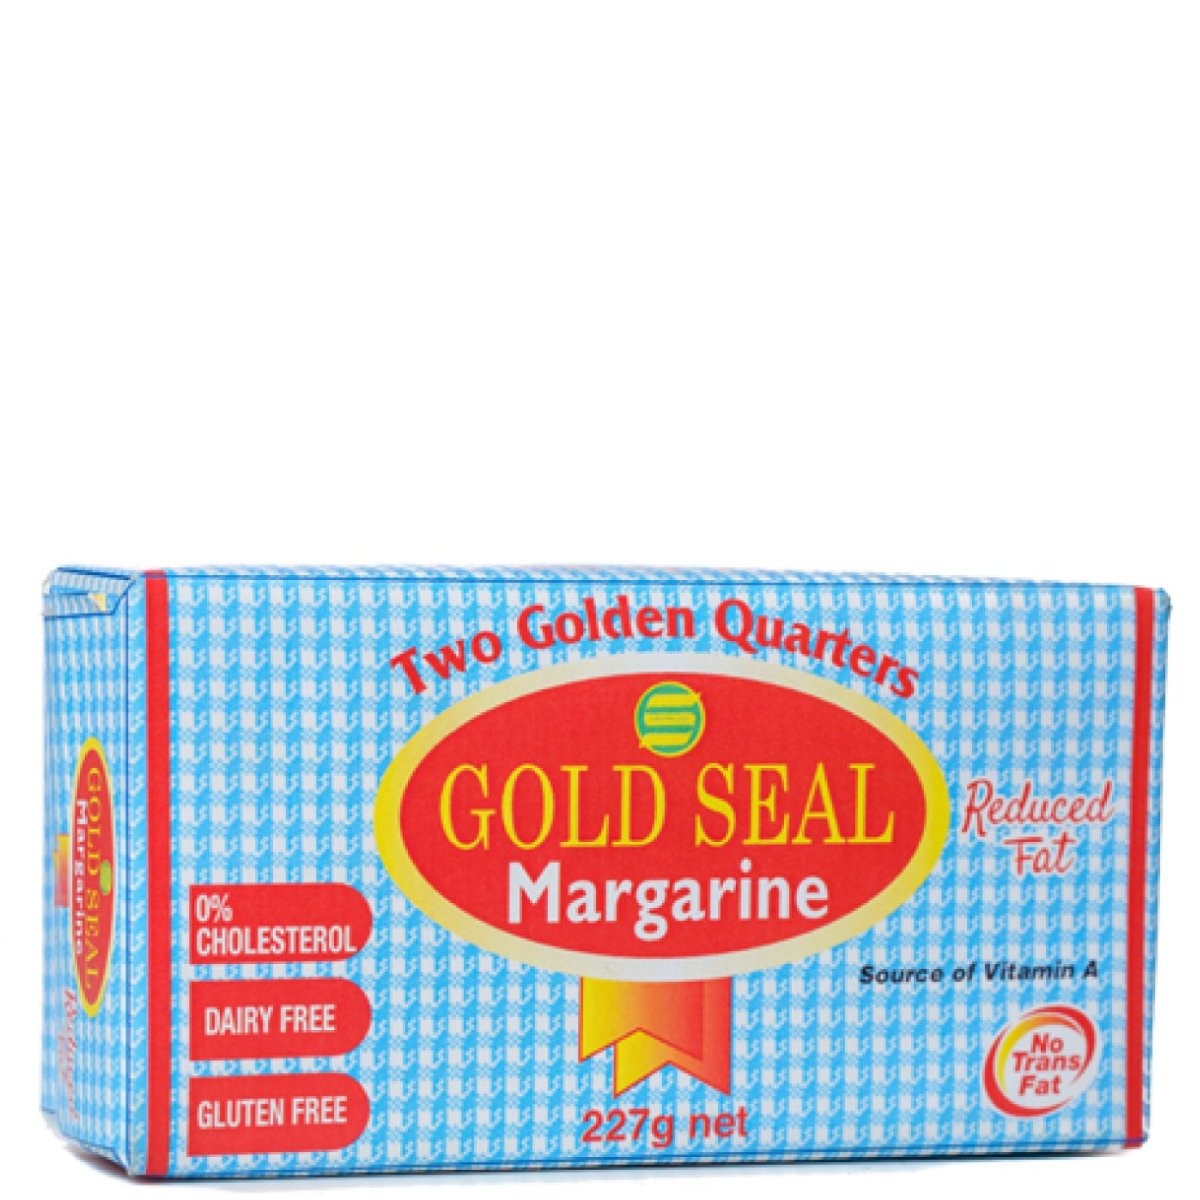 GOLD SEAL MARGARINE REDUCED FAT 227g